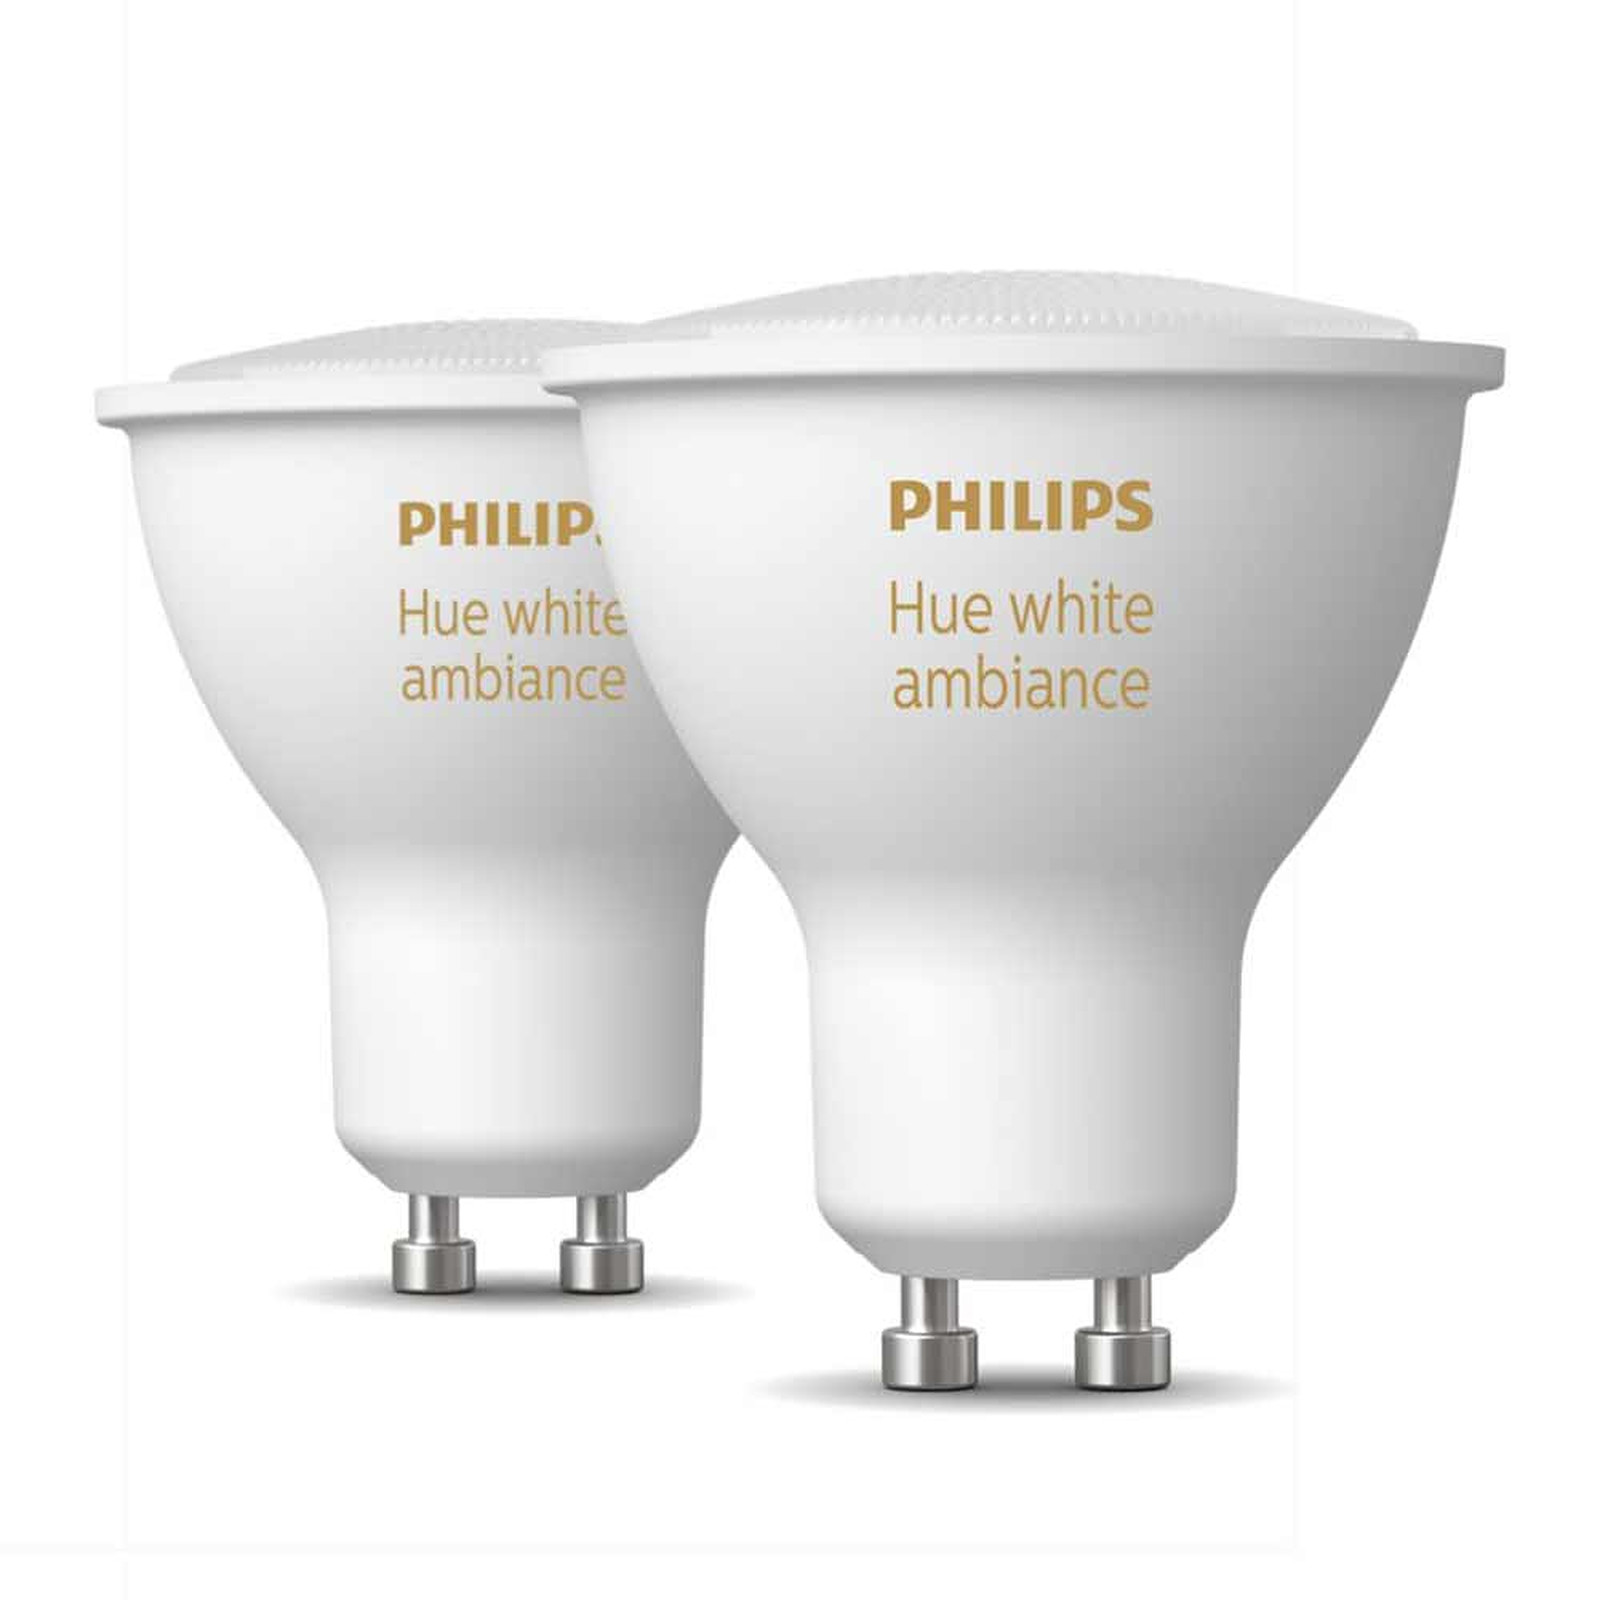 Philips Hue White Ambiance GU10 5.5 W Bluetooth x 2 - Ampoule connectee Philips